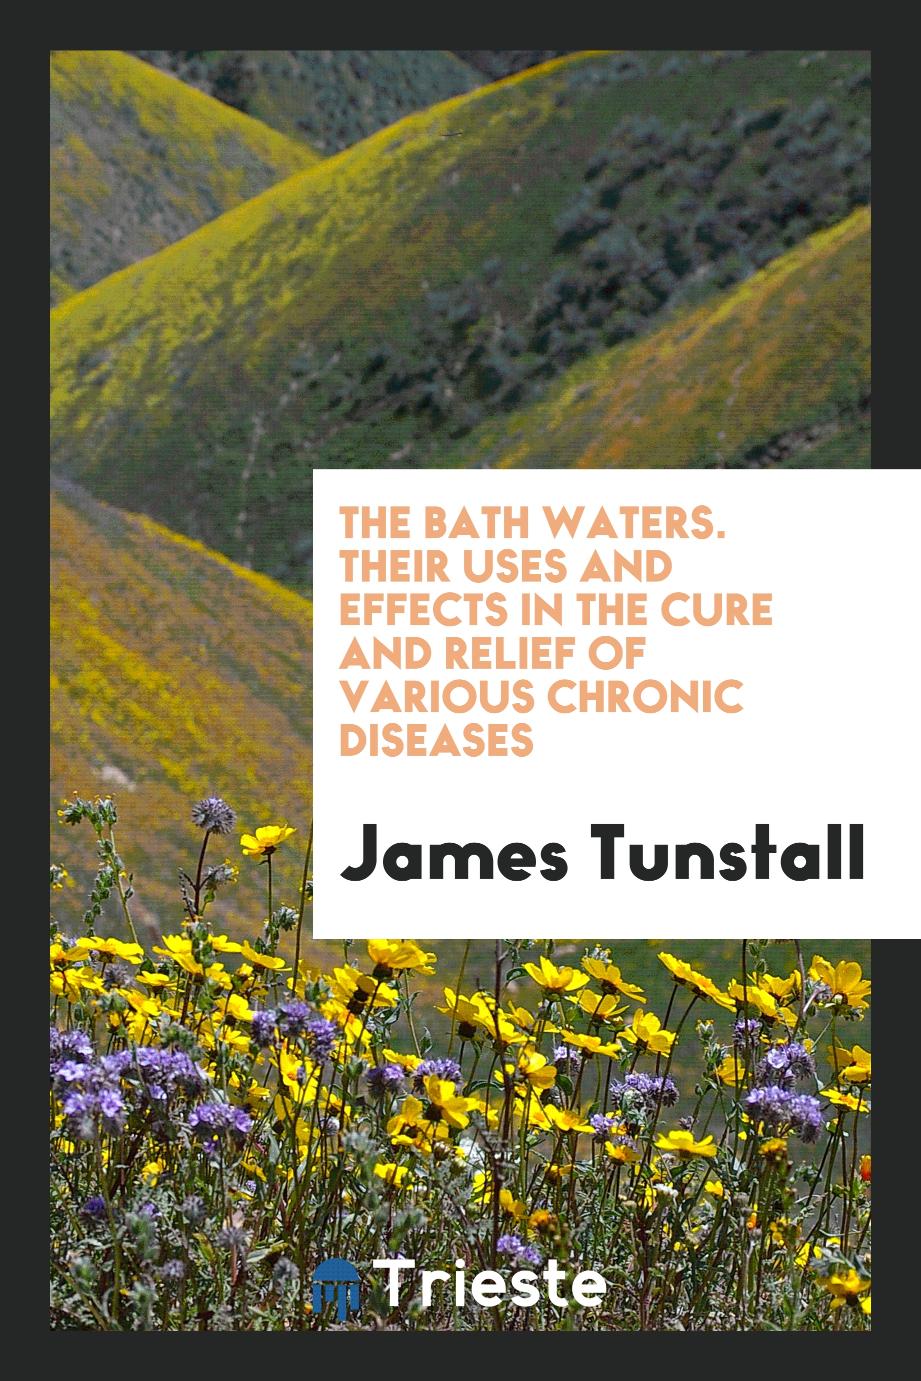 The Bath Waters. Their Uses and Effects in the Cure and Relief of Various Chronic Diseases